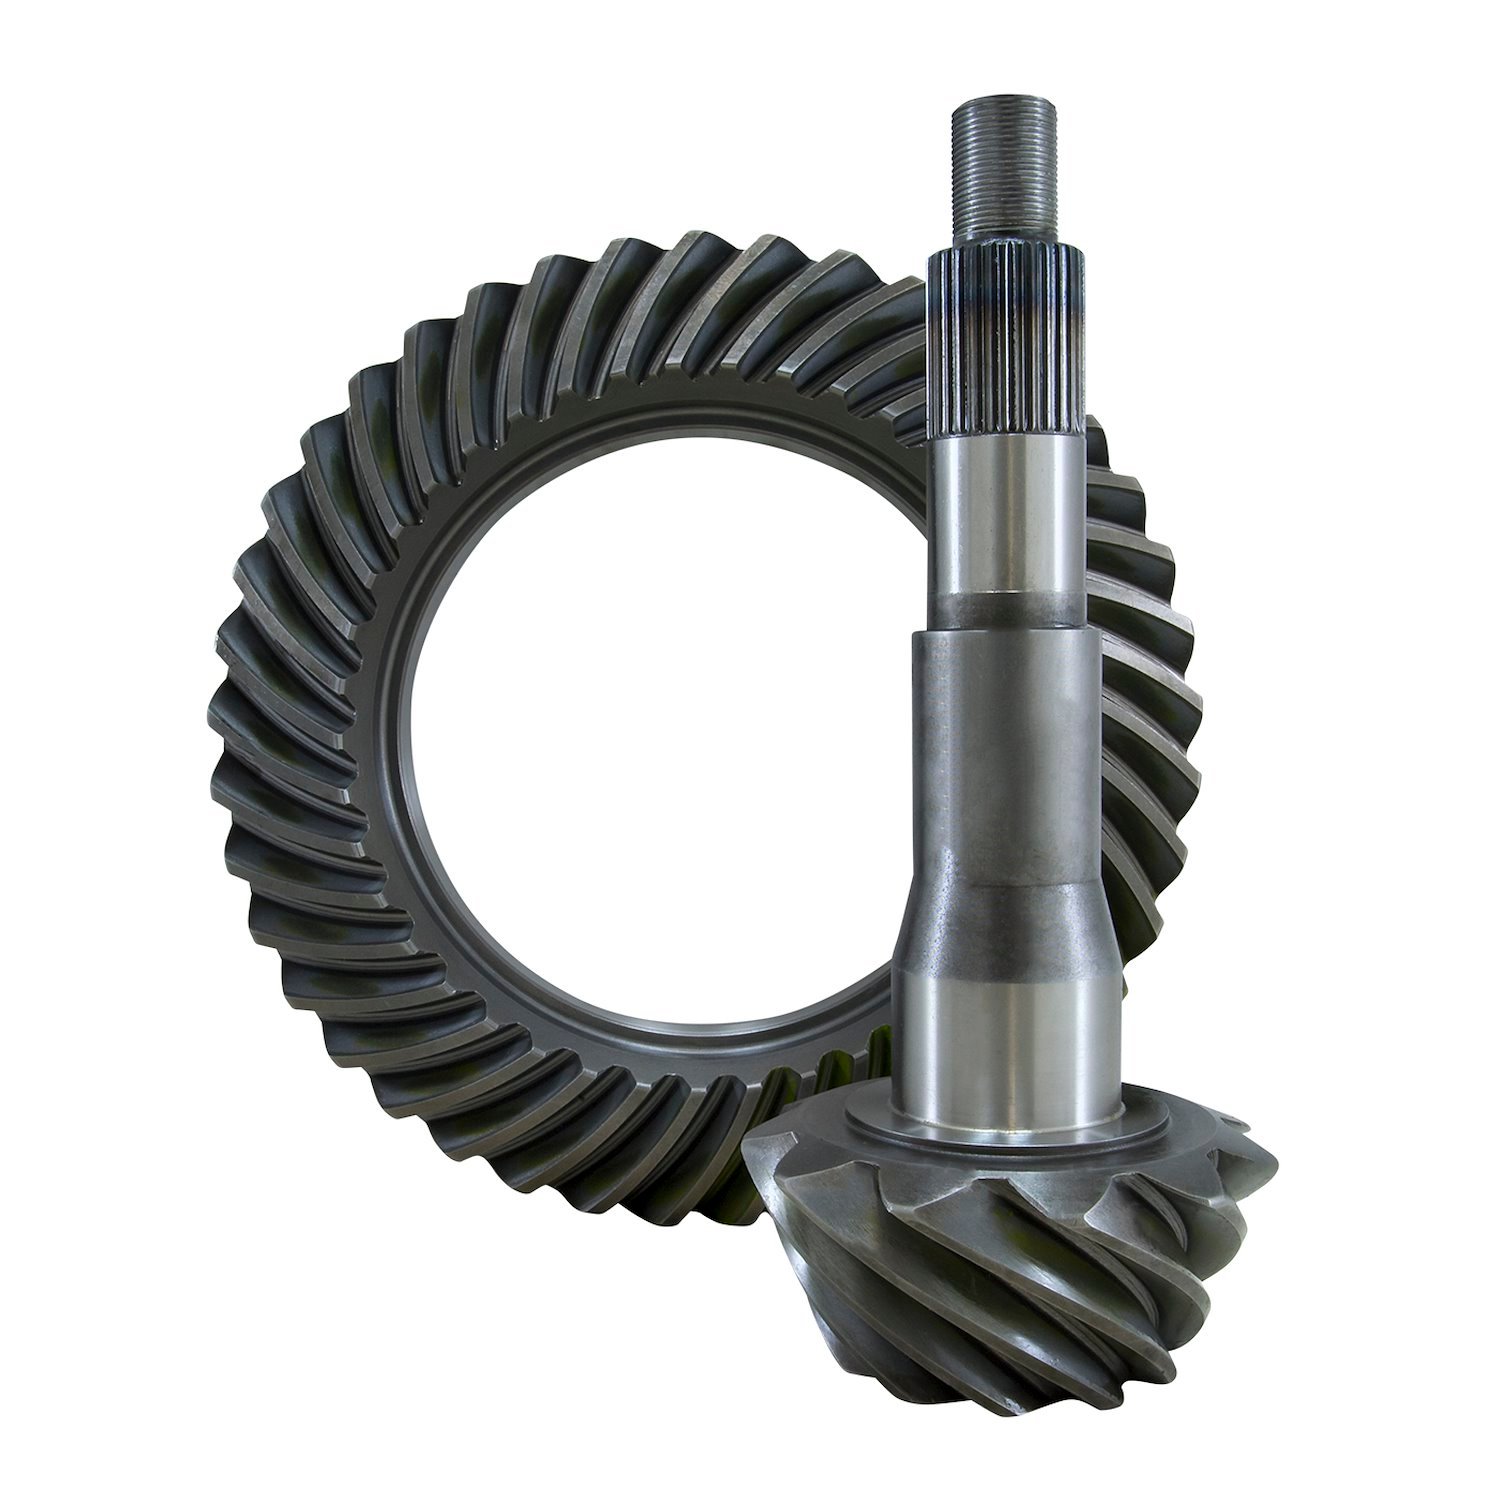 USA Standard 36274 Ring & Pinion Gear Set, For '10 & Down Ford 10.5 in., 4.11 Ratio.